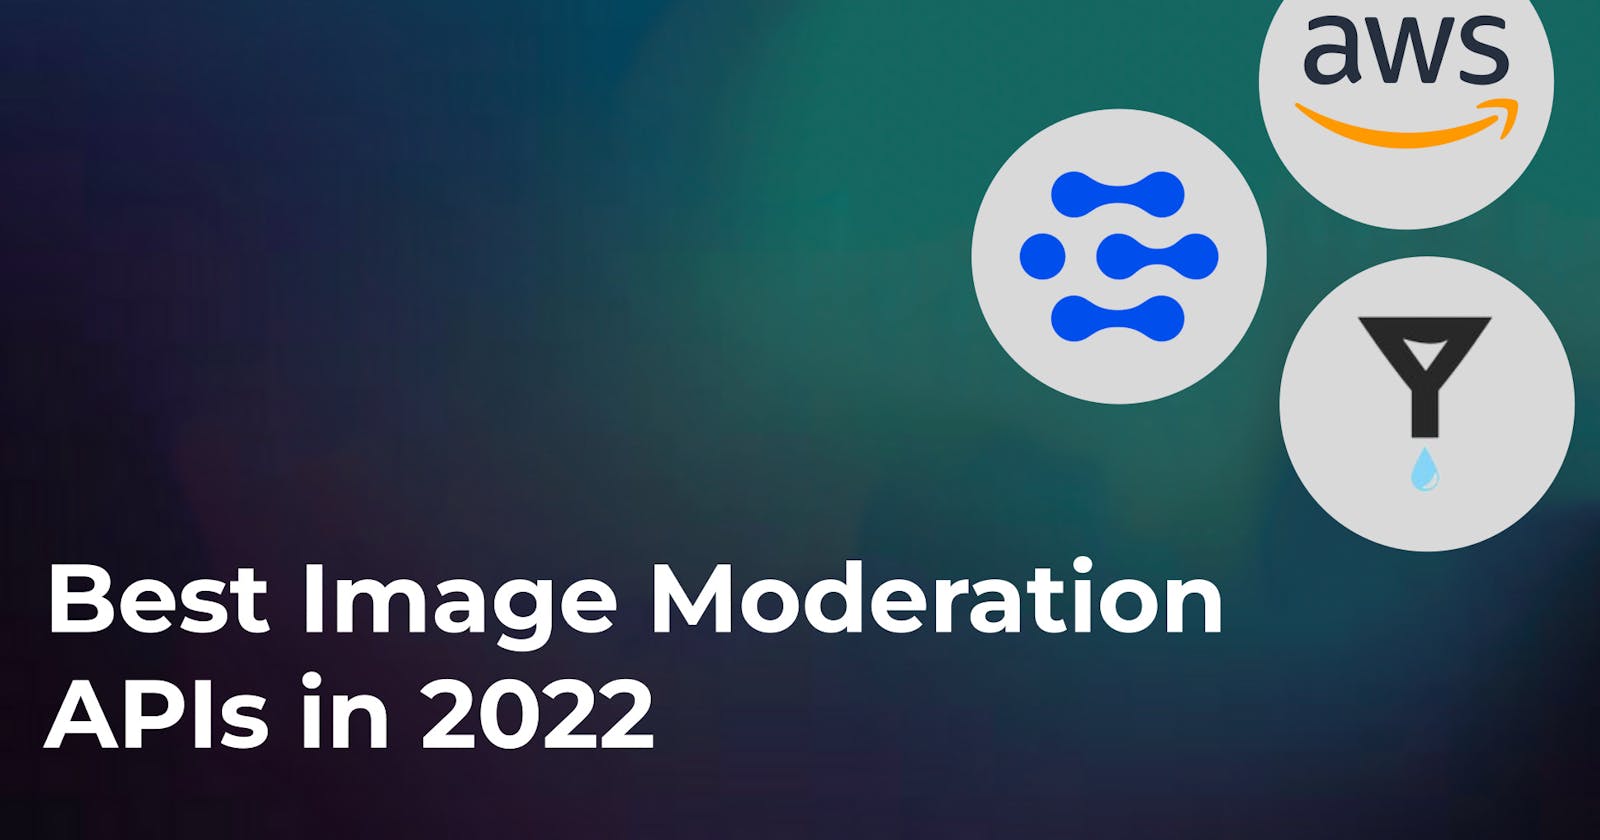 Best Image Moderation APIs in 2022